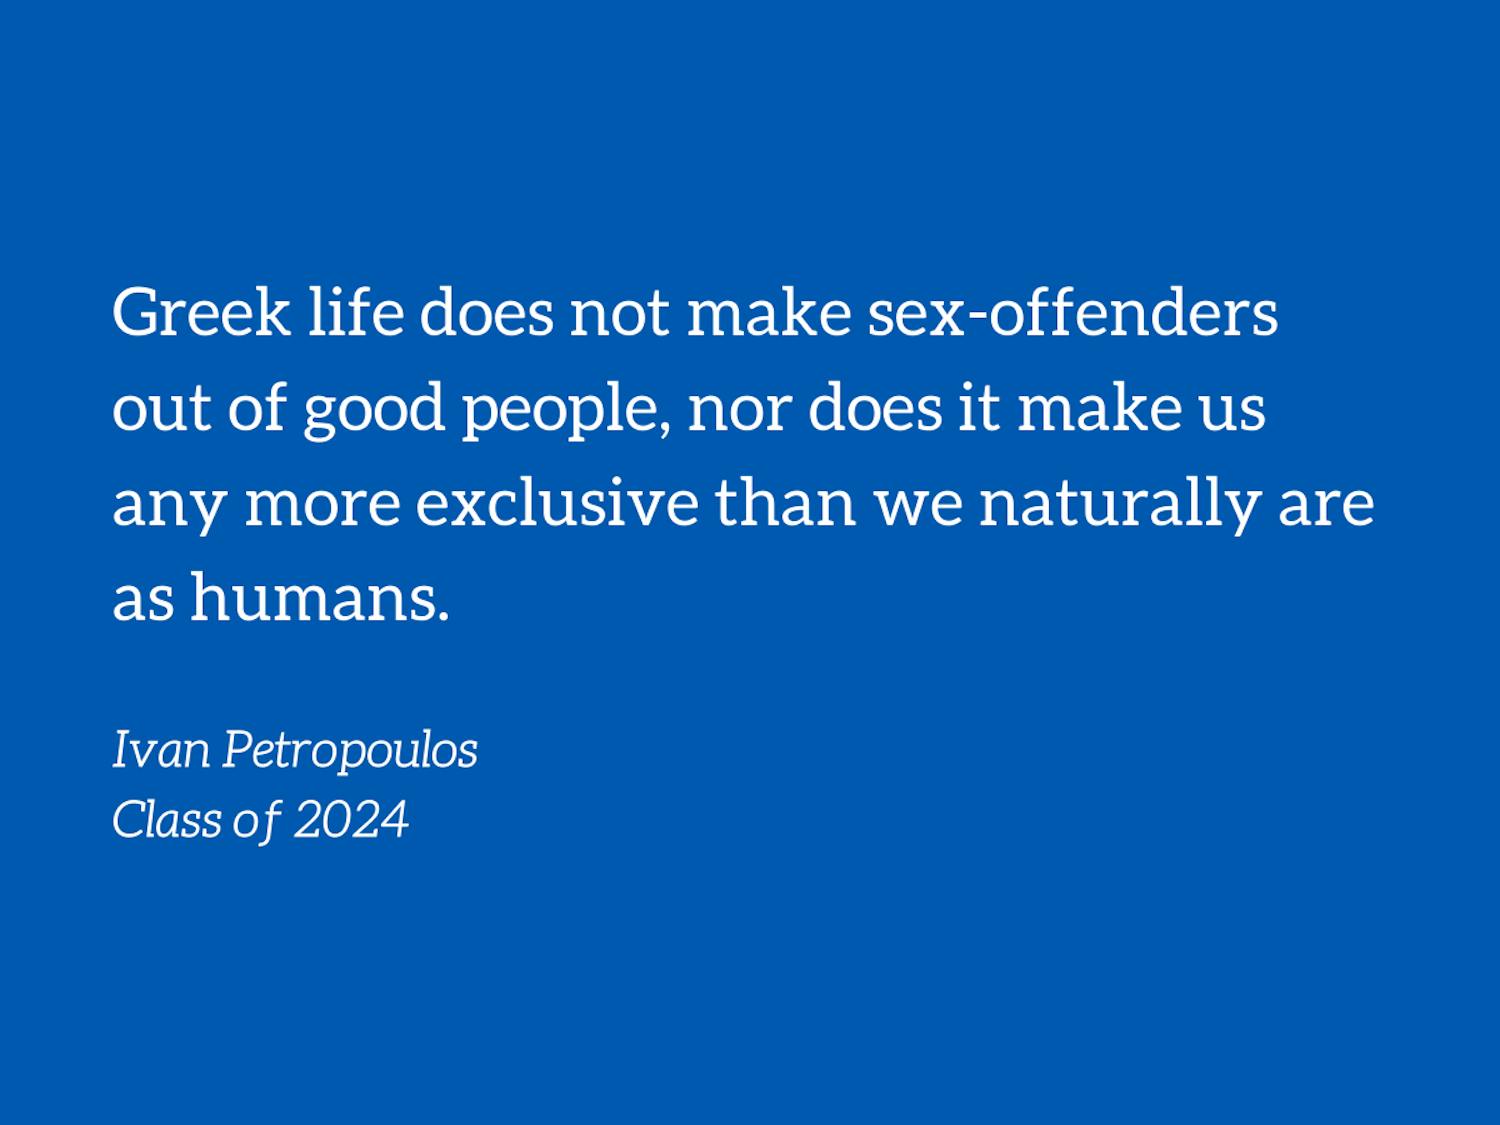 2021-04-07-petropoulos-abolish-greek-life.png